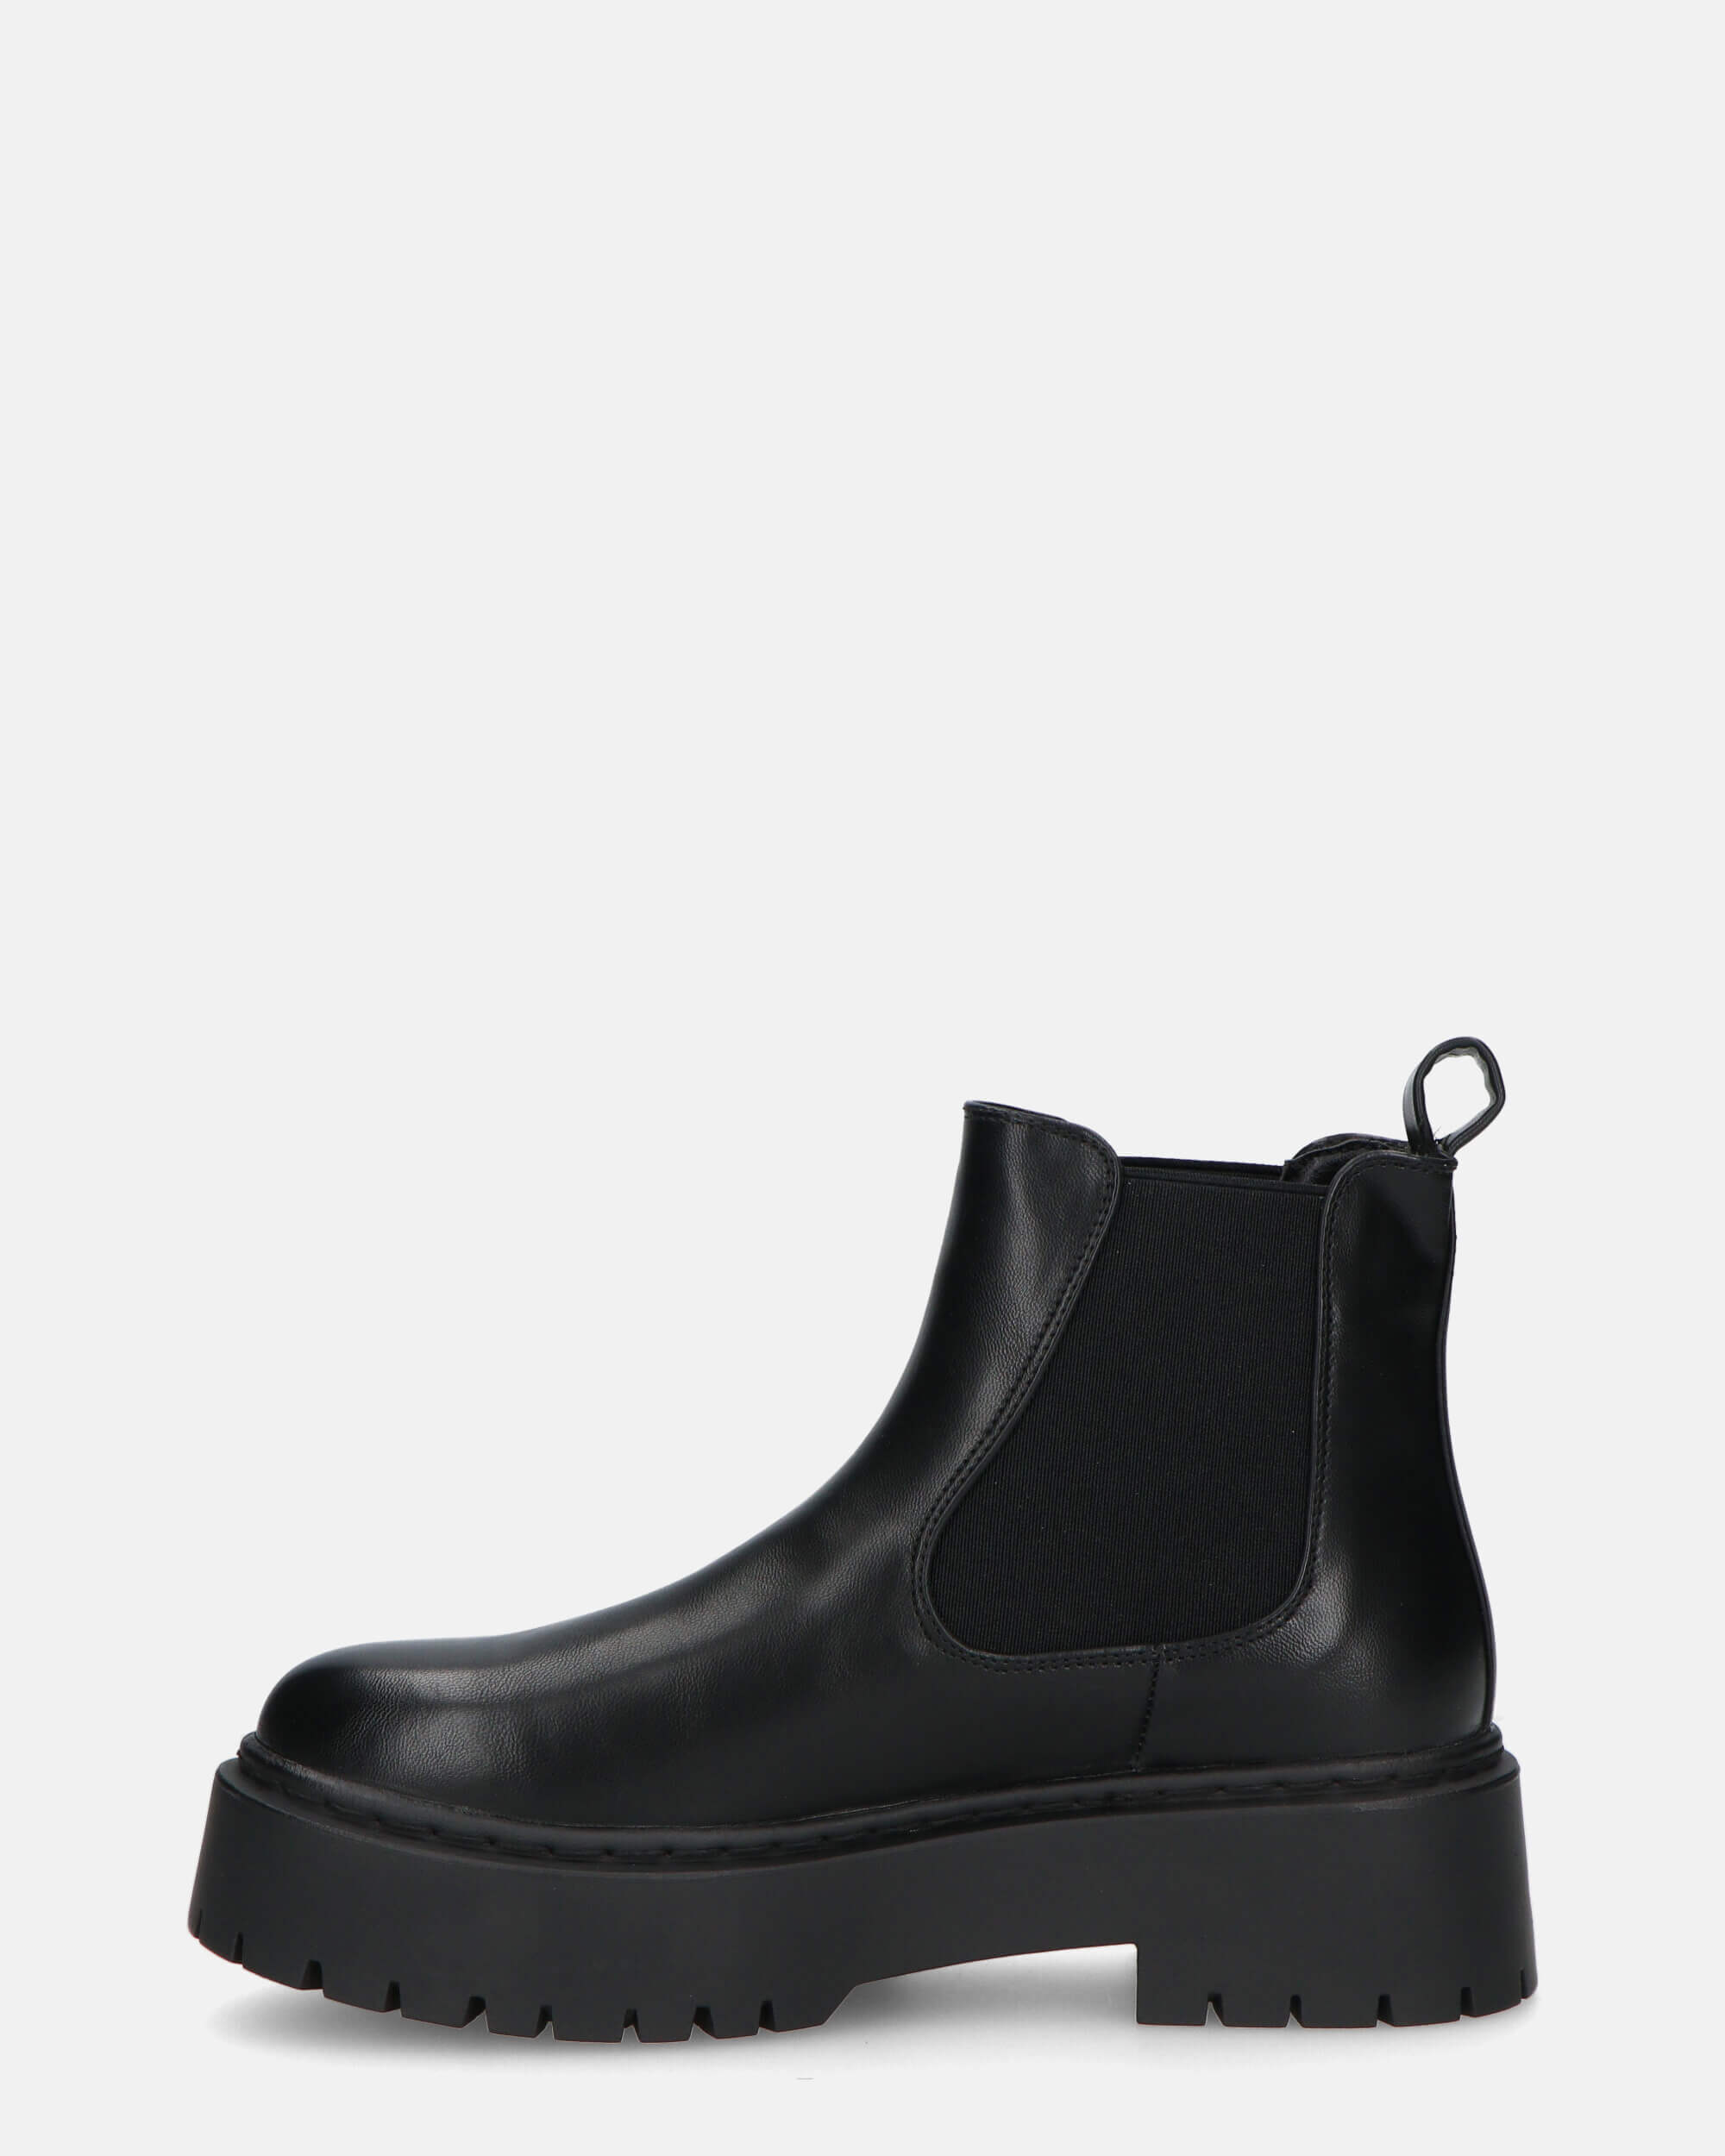 TULLY - black platform faux leather ankle boots